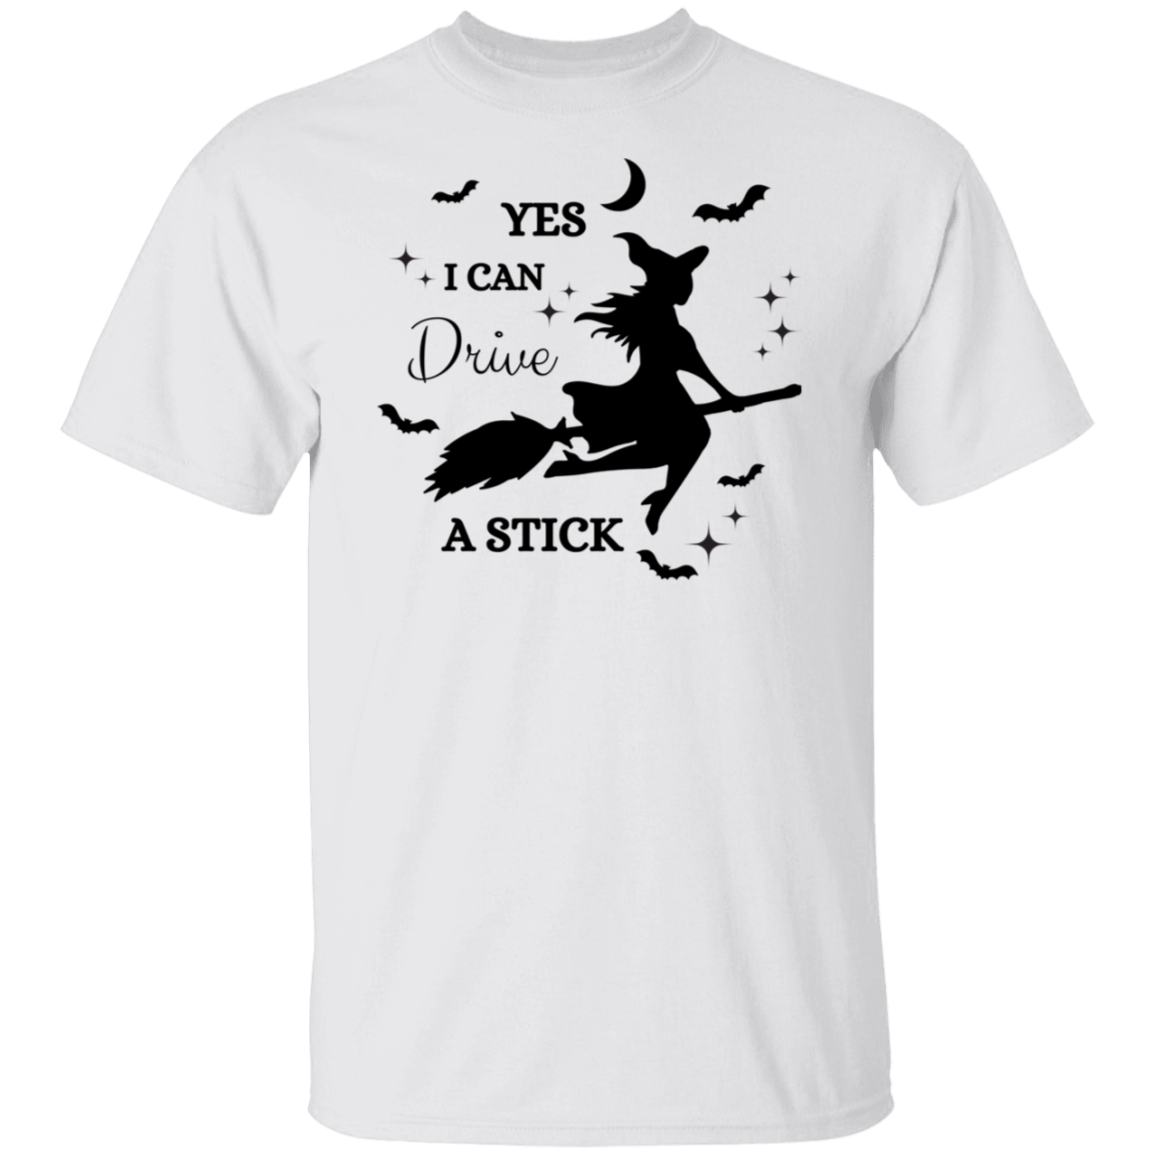 Yes I Can Drive a Stick G500 5.3 oz. T-Shirt